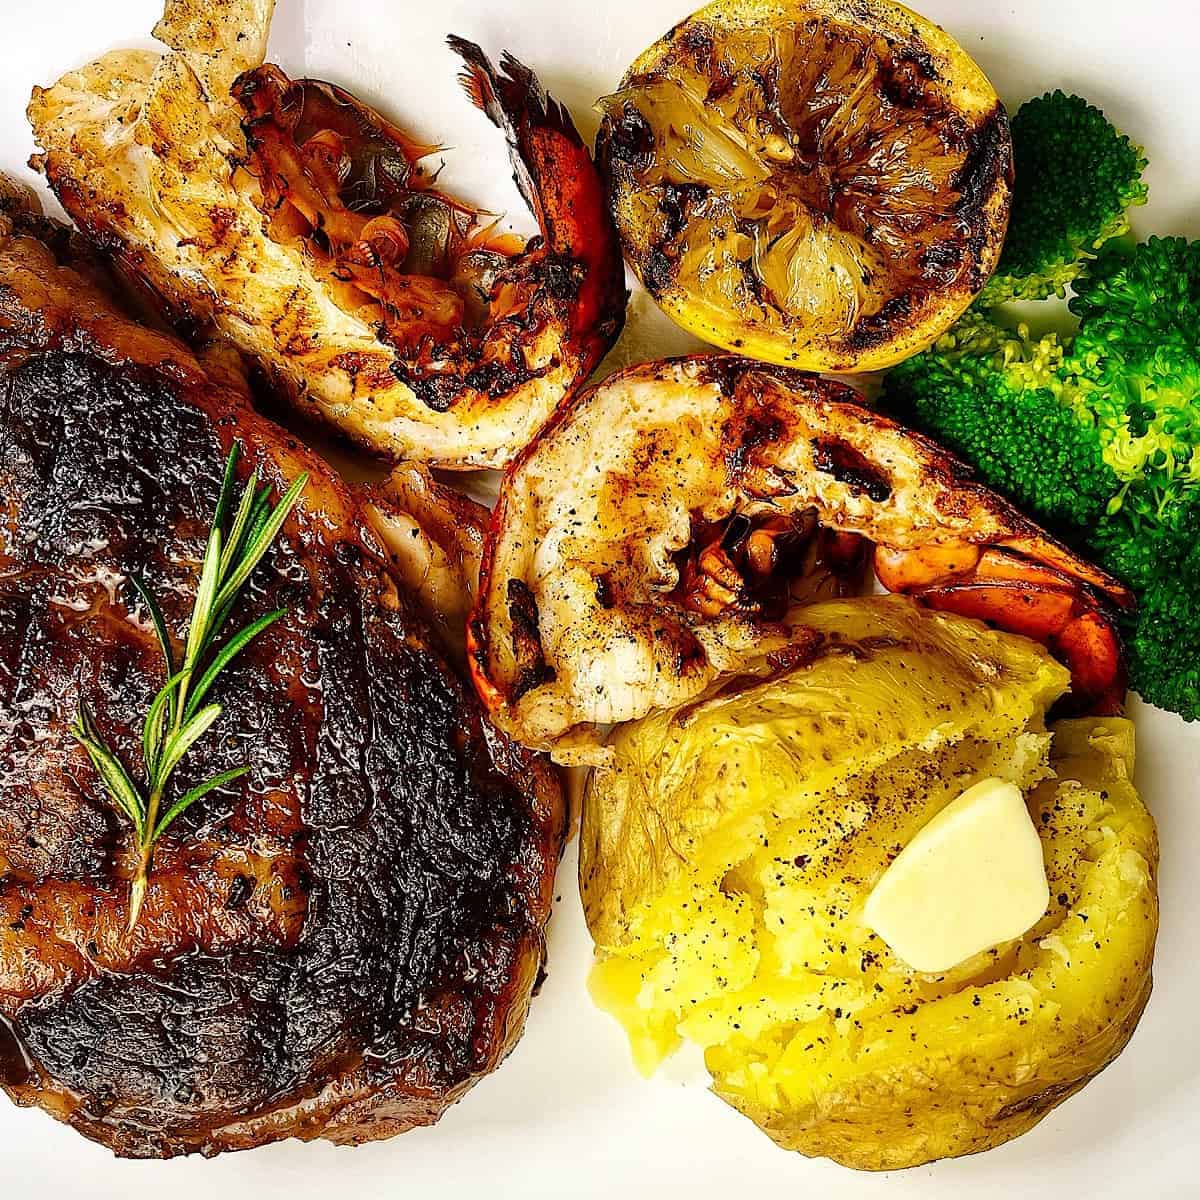 Surf and Turf​ on plate lobster steak potato and broccoli